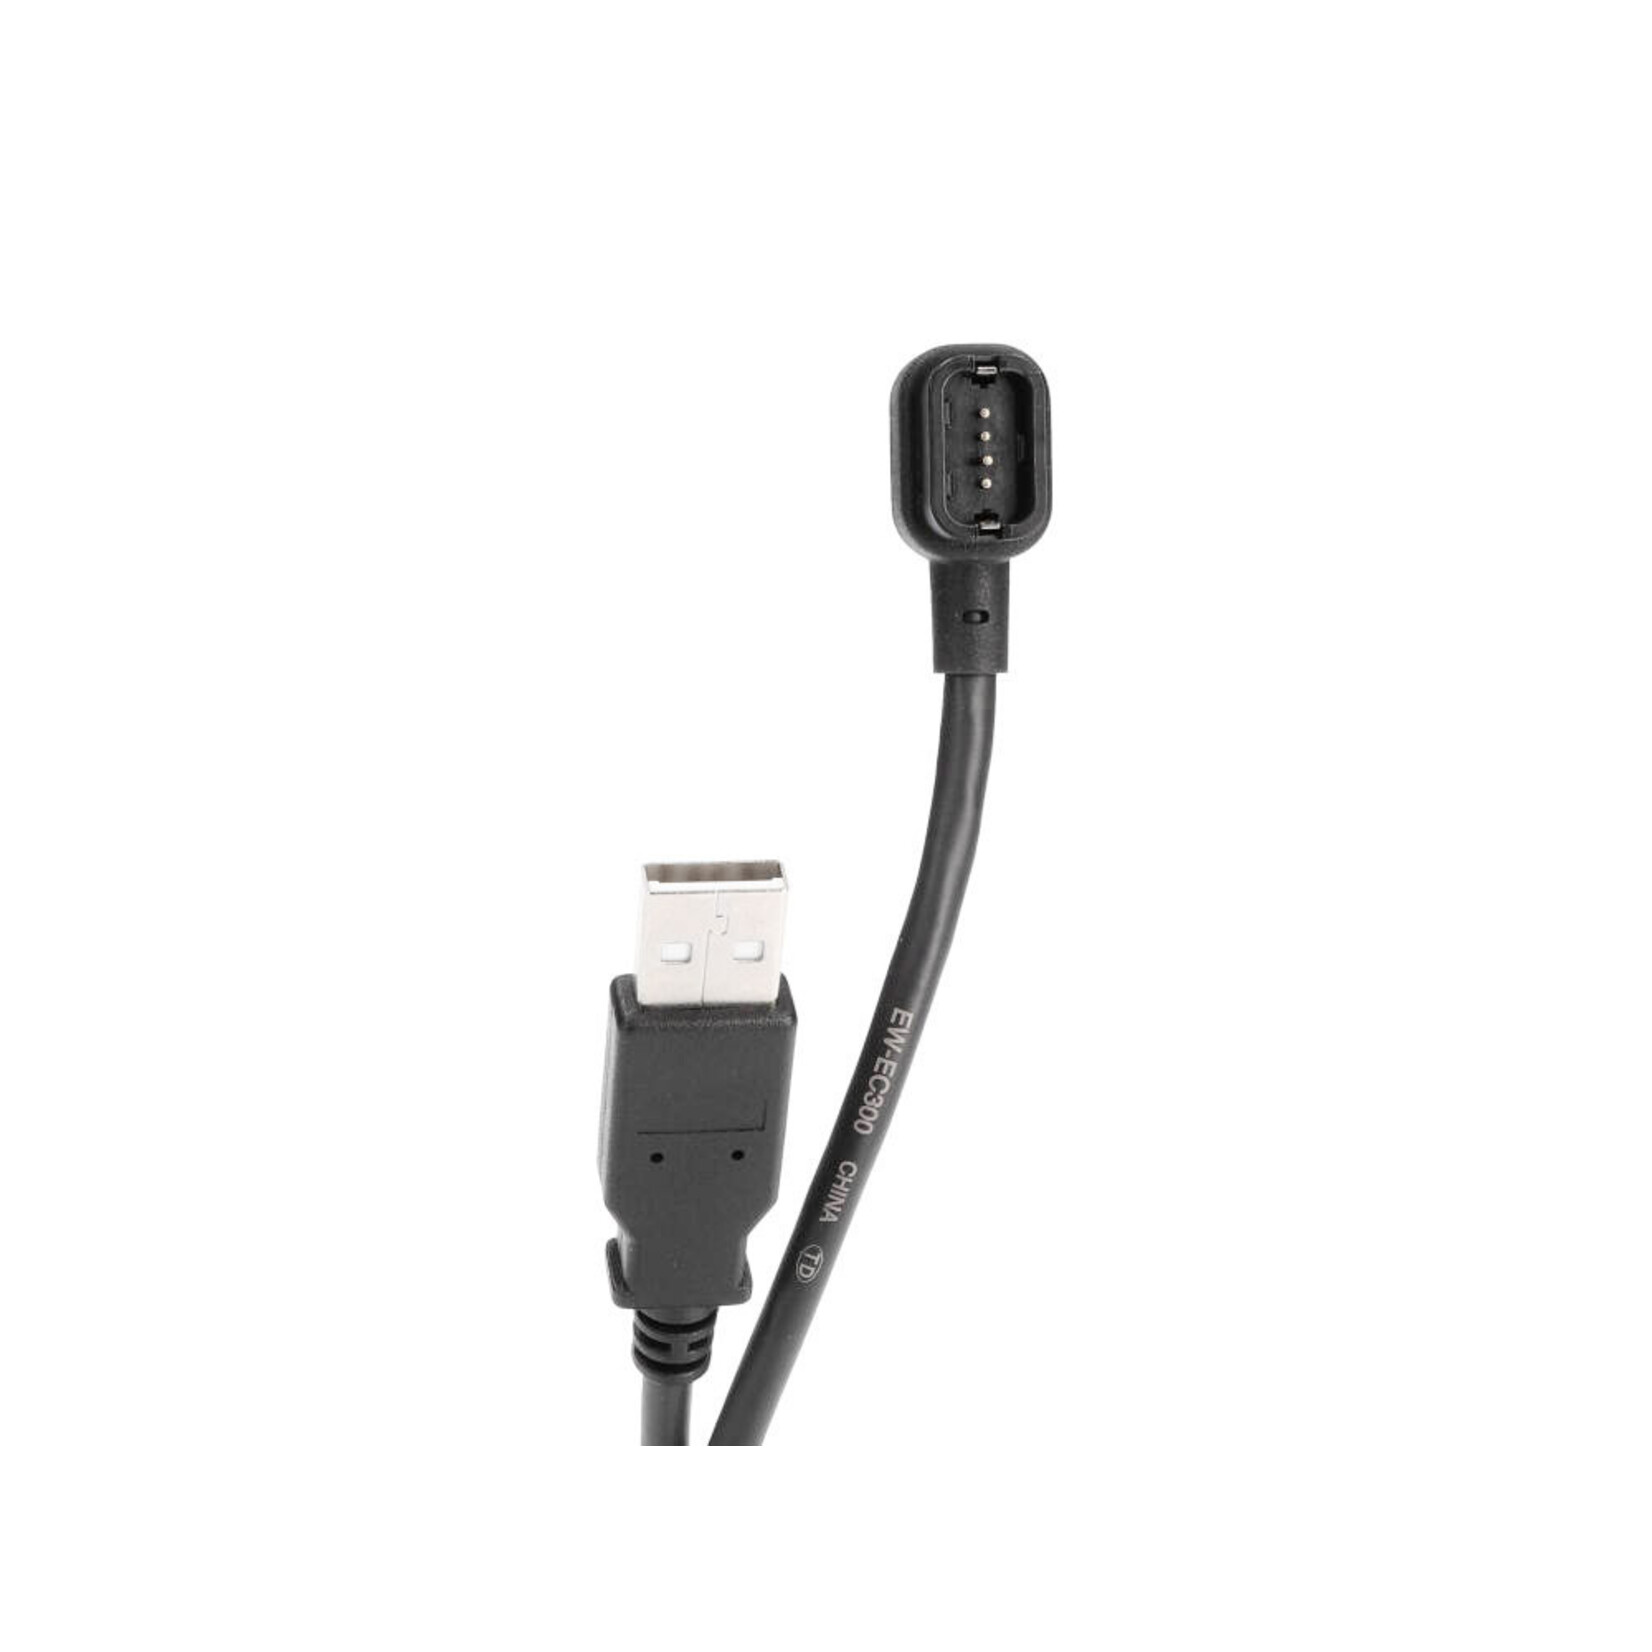 SHIMANO EW-EC300 BATTERY CHARGING CABLE, 1700 MM